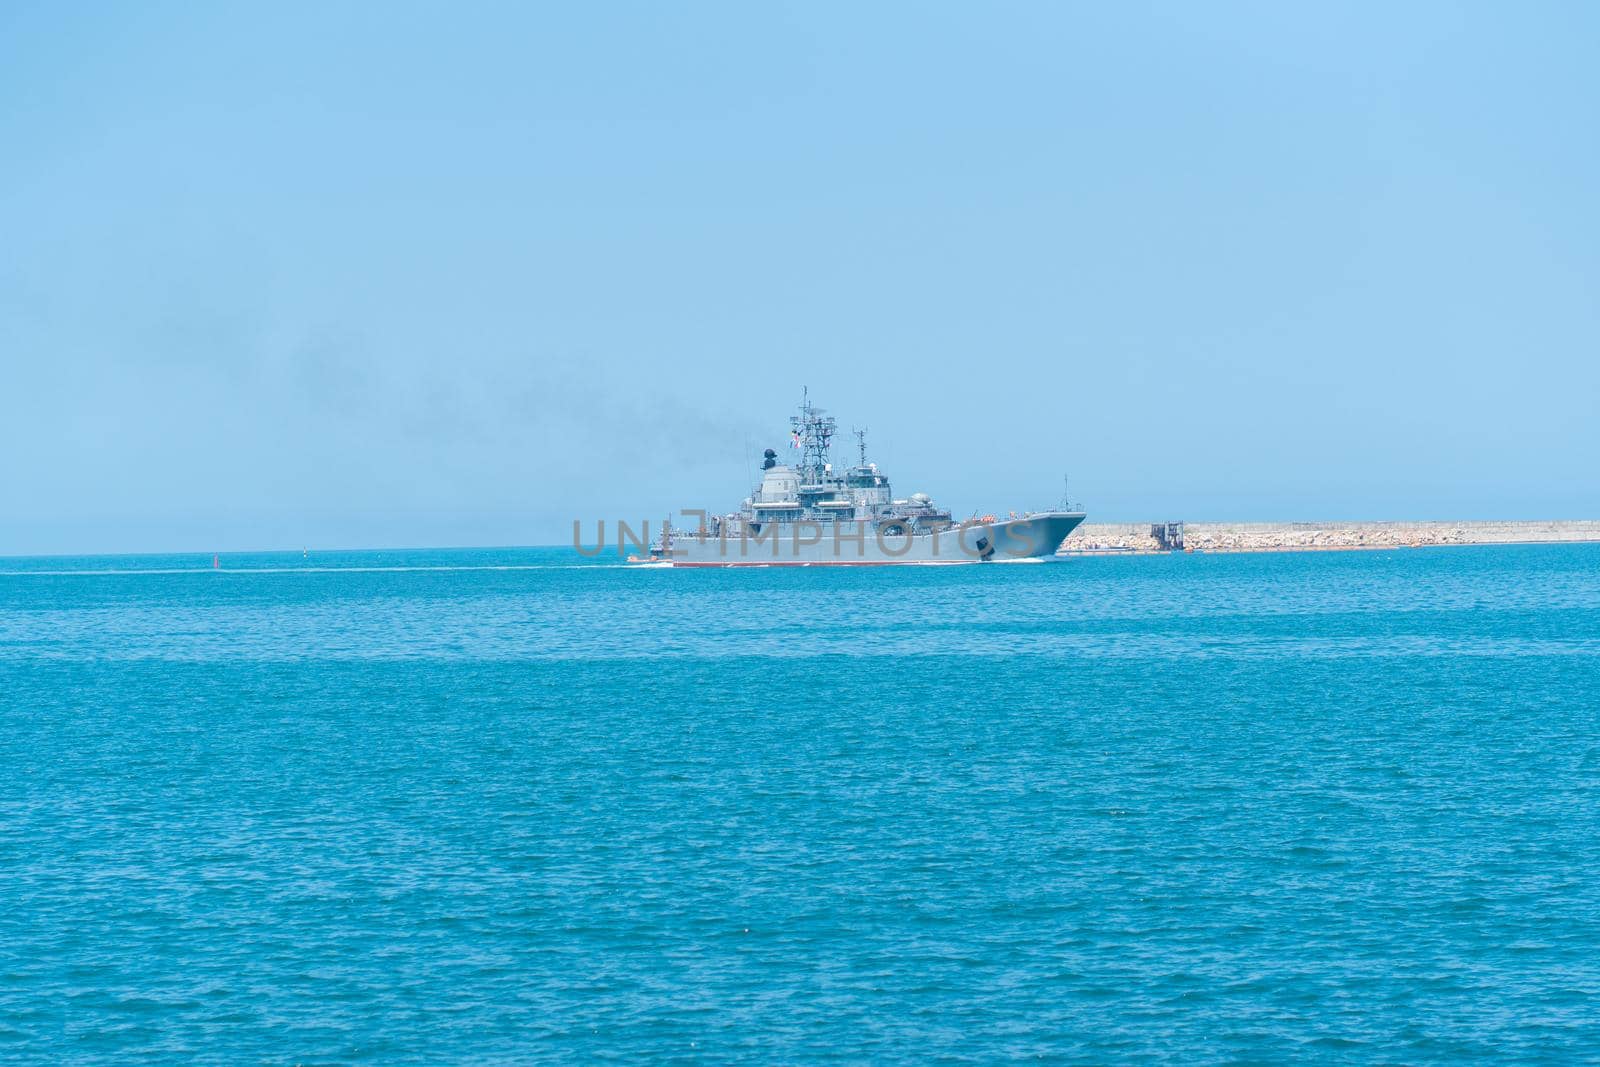 RUSSIA, CRIMEA - JUL 08, 2022: Russian military sevastopol group navy russia day sky city battleship, for boat crimea from frigate and harbor force, security defense. Destroyer steel missile,